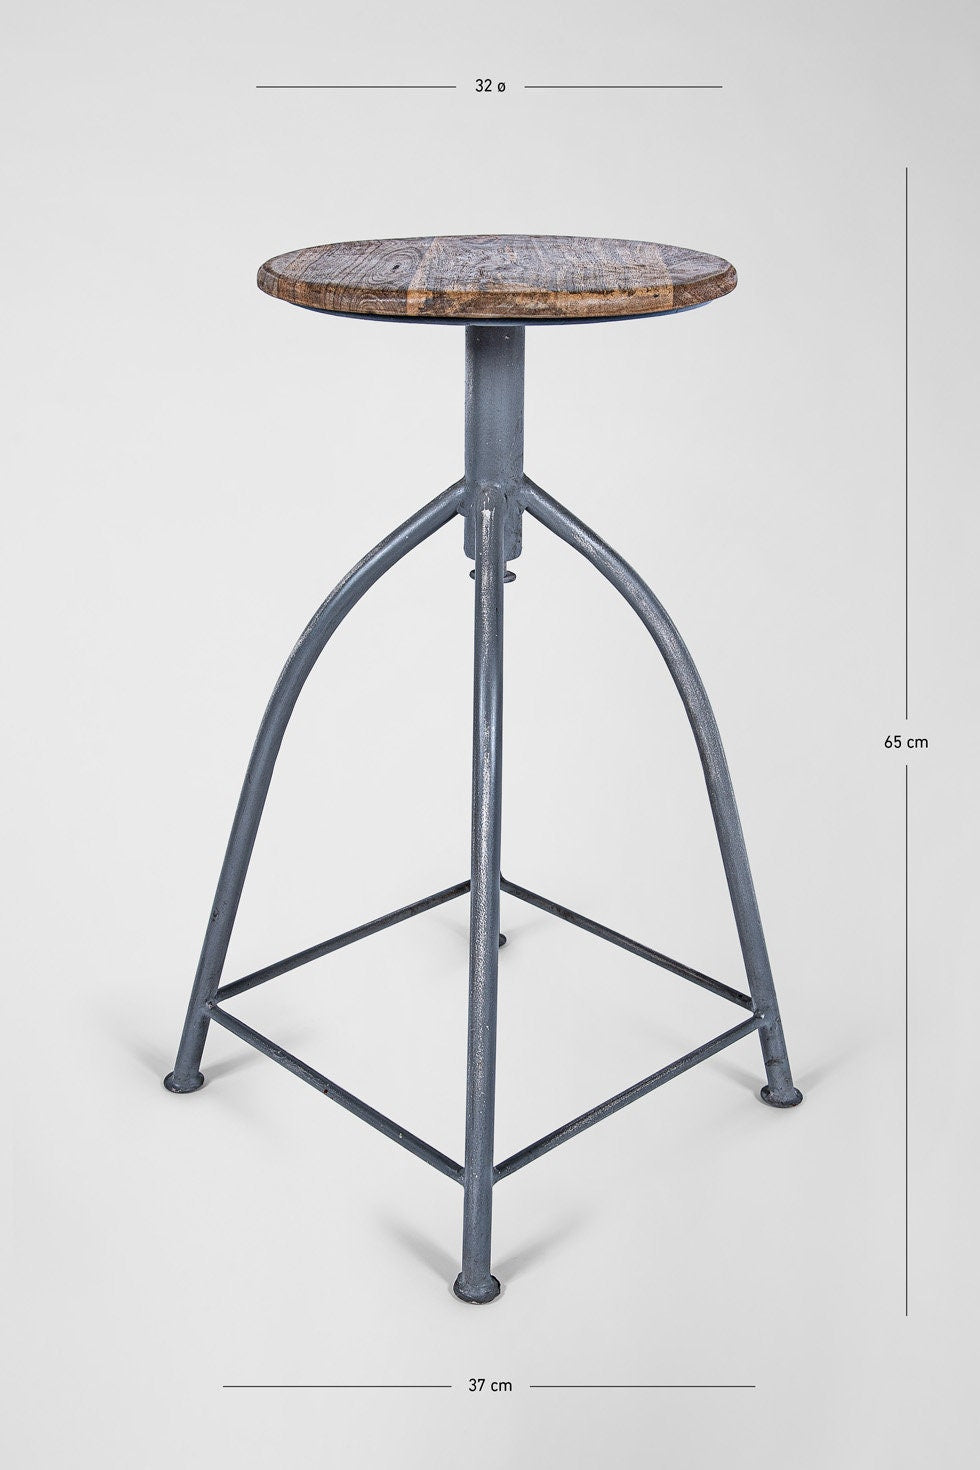 Mrs. Greyhound - Retro Vintage Industrial Design Metal Stool with Wooden Seat